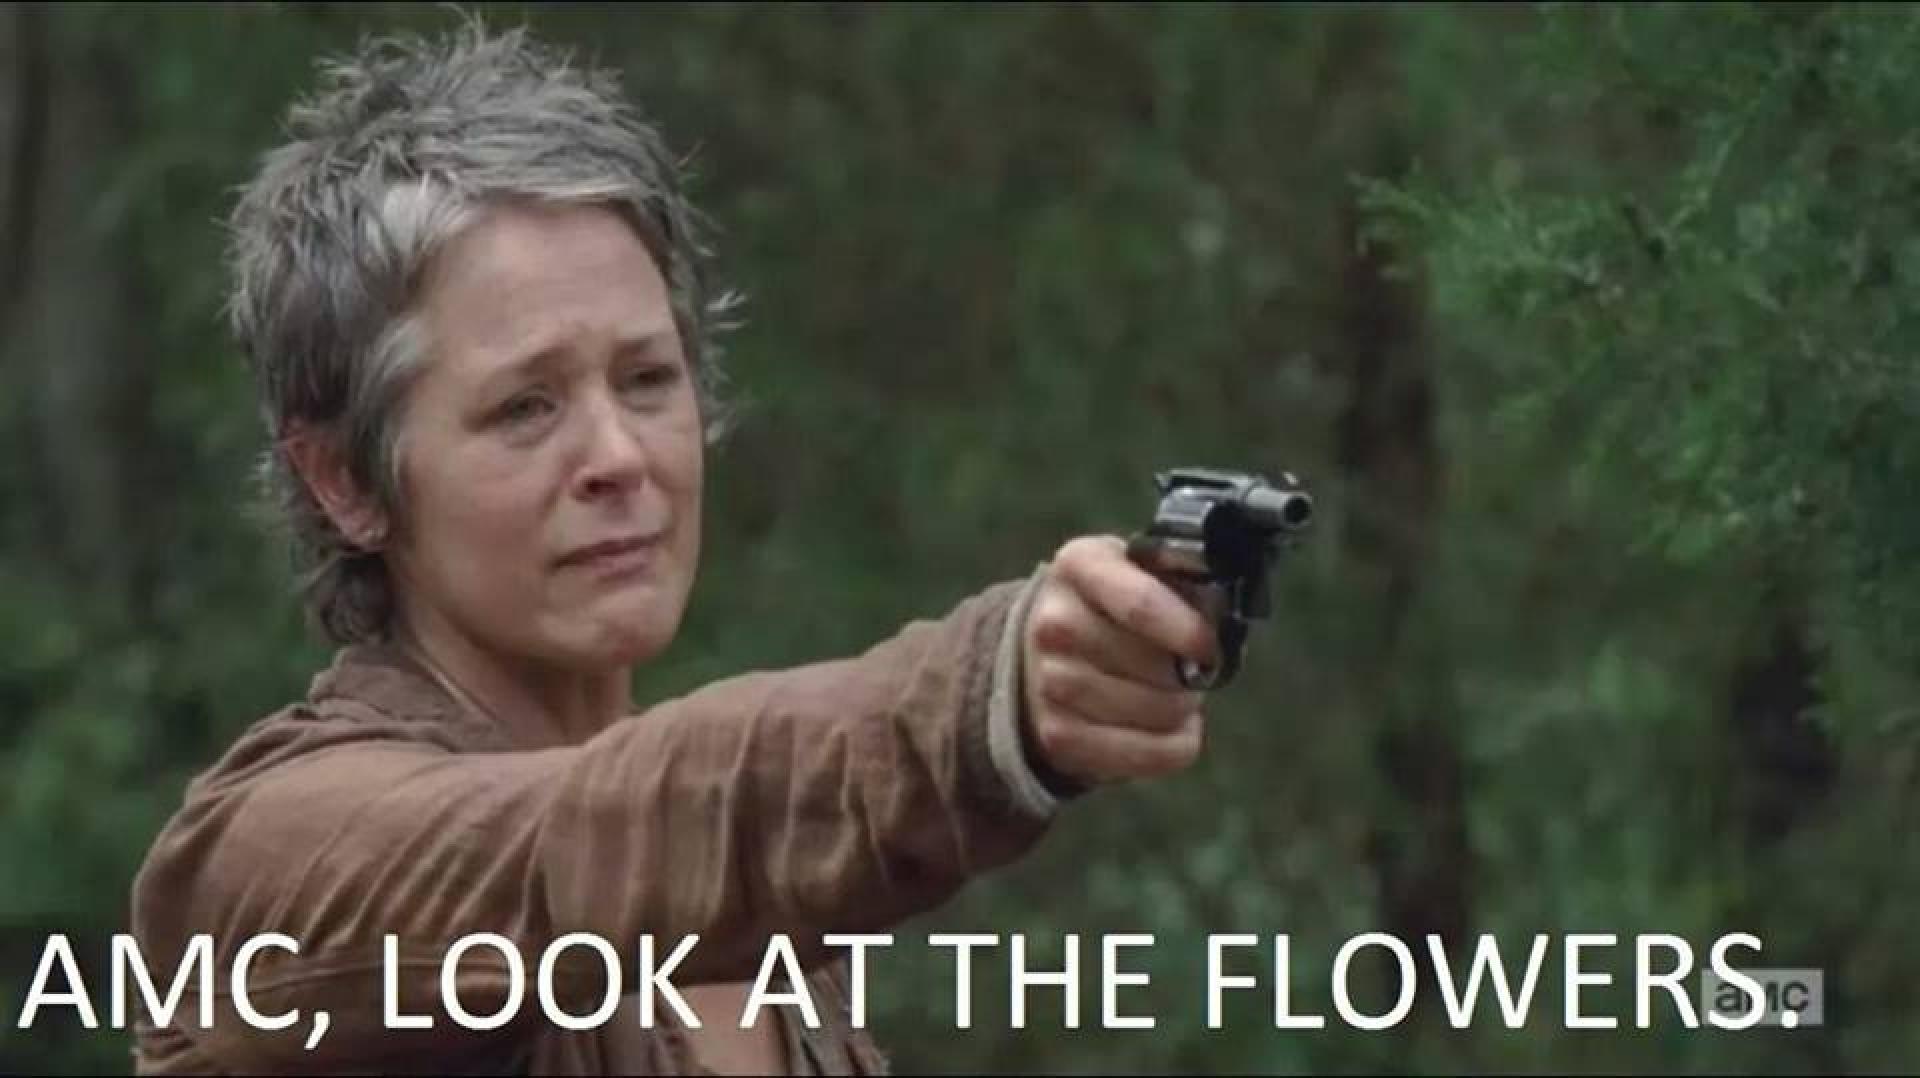 AMC look at the flowers